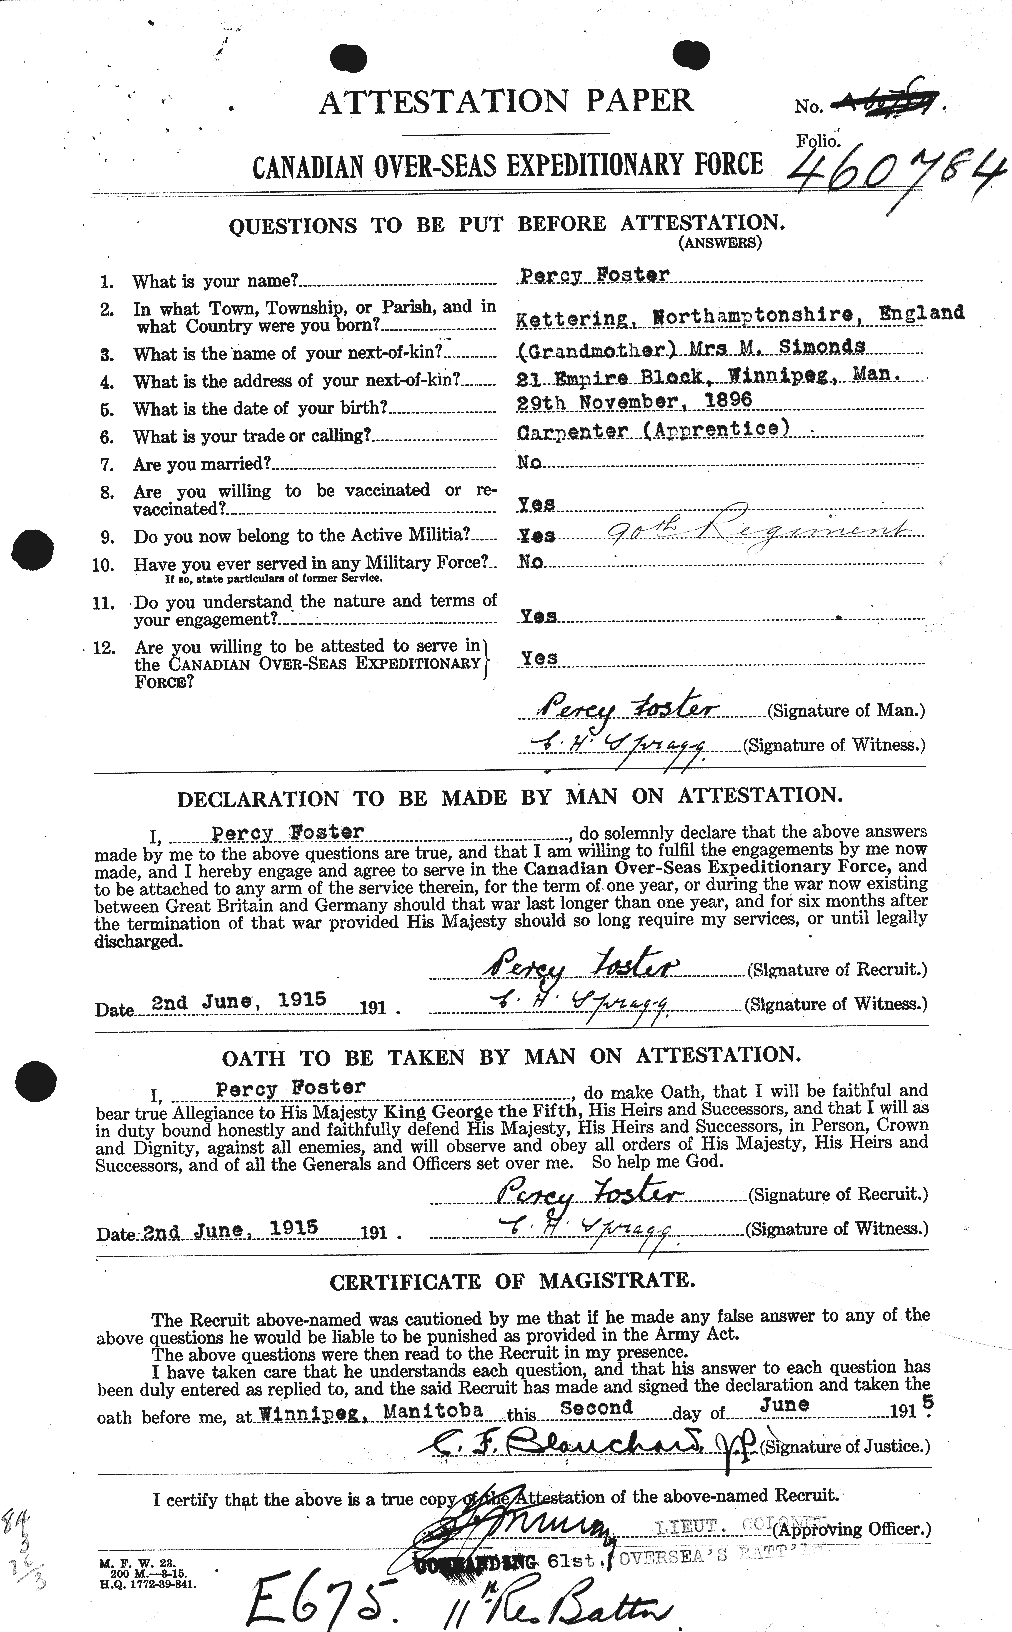 Personnel Records of the First World War - CEF 333441a